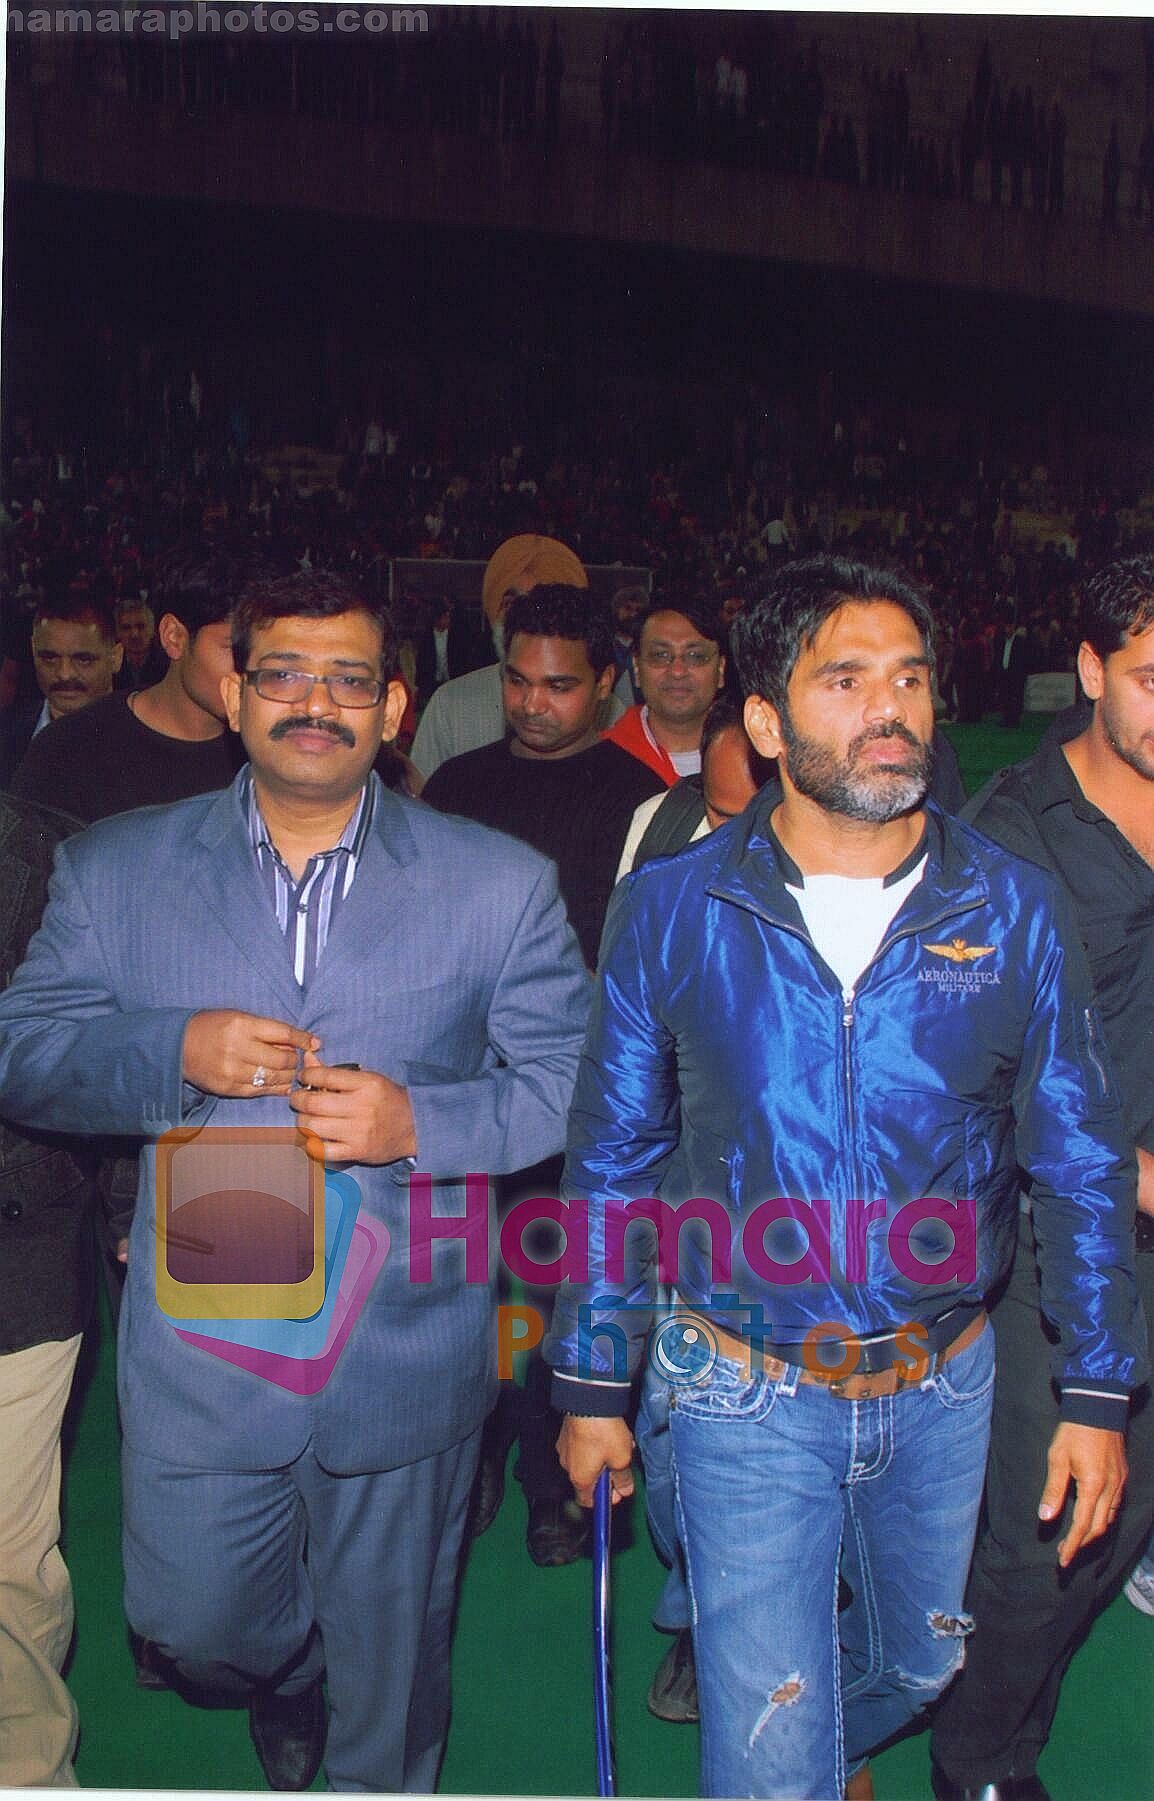 CMD of AMR foundation A.Mahesh Reddy, Sunil Shetty at AMR Foundation charity event in Chandigarh on 20th Feb 2010